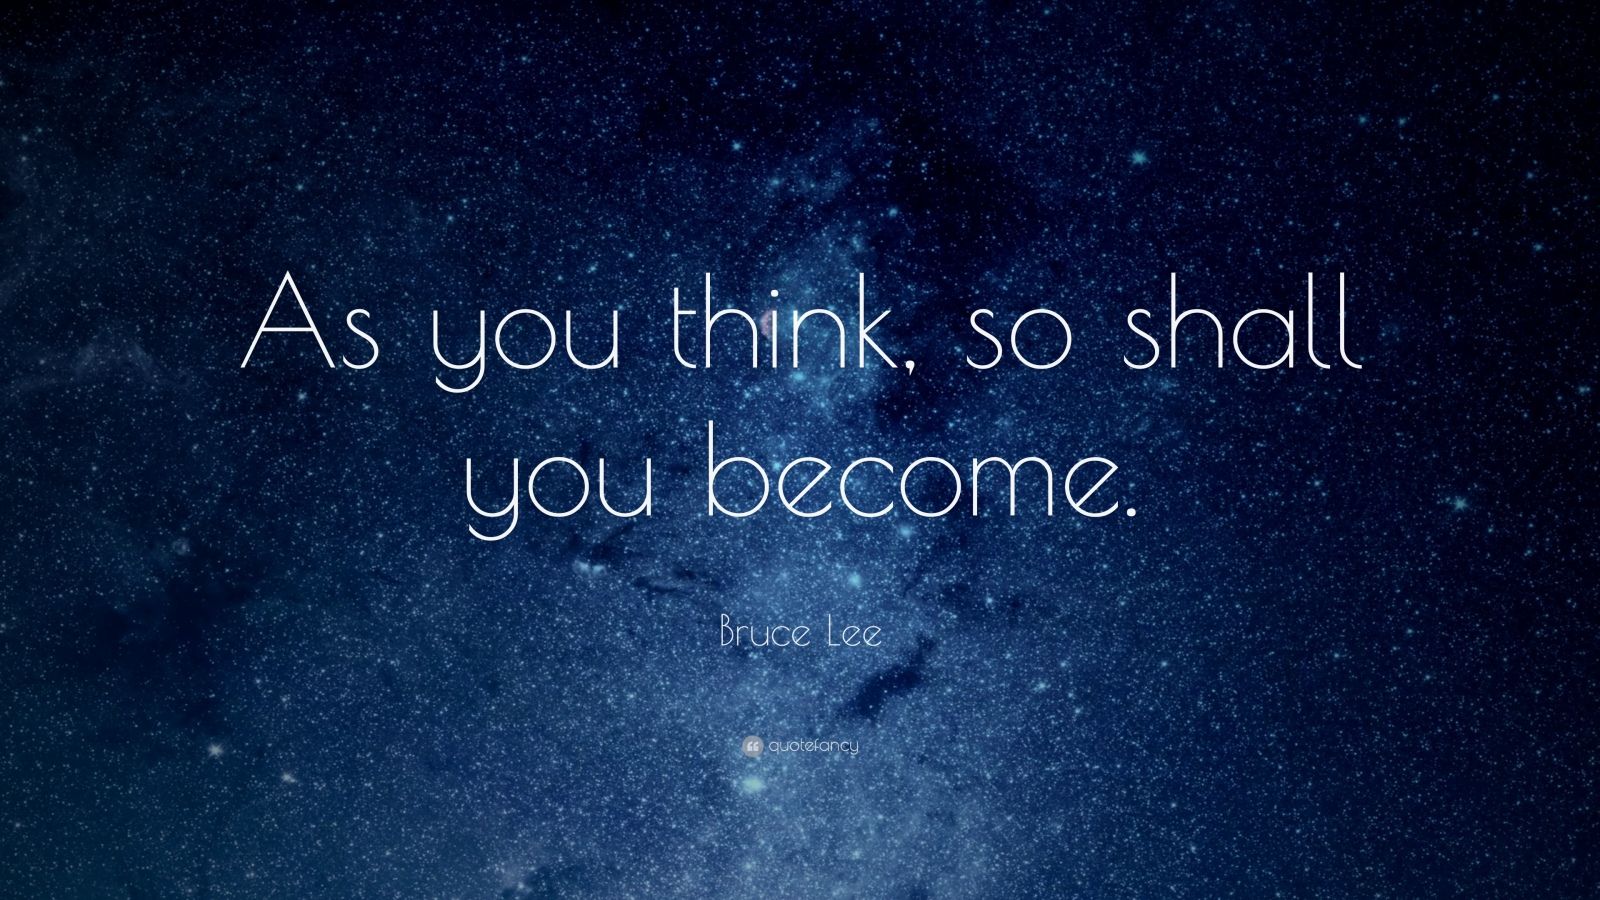 Bruce Lee Quote: “As you think, so shall you become.” (25 wallpapers